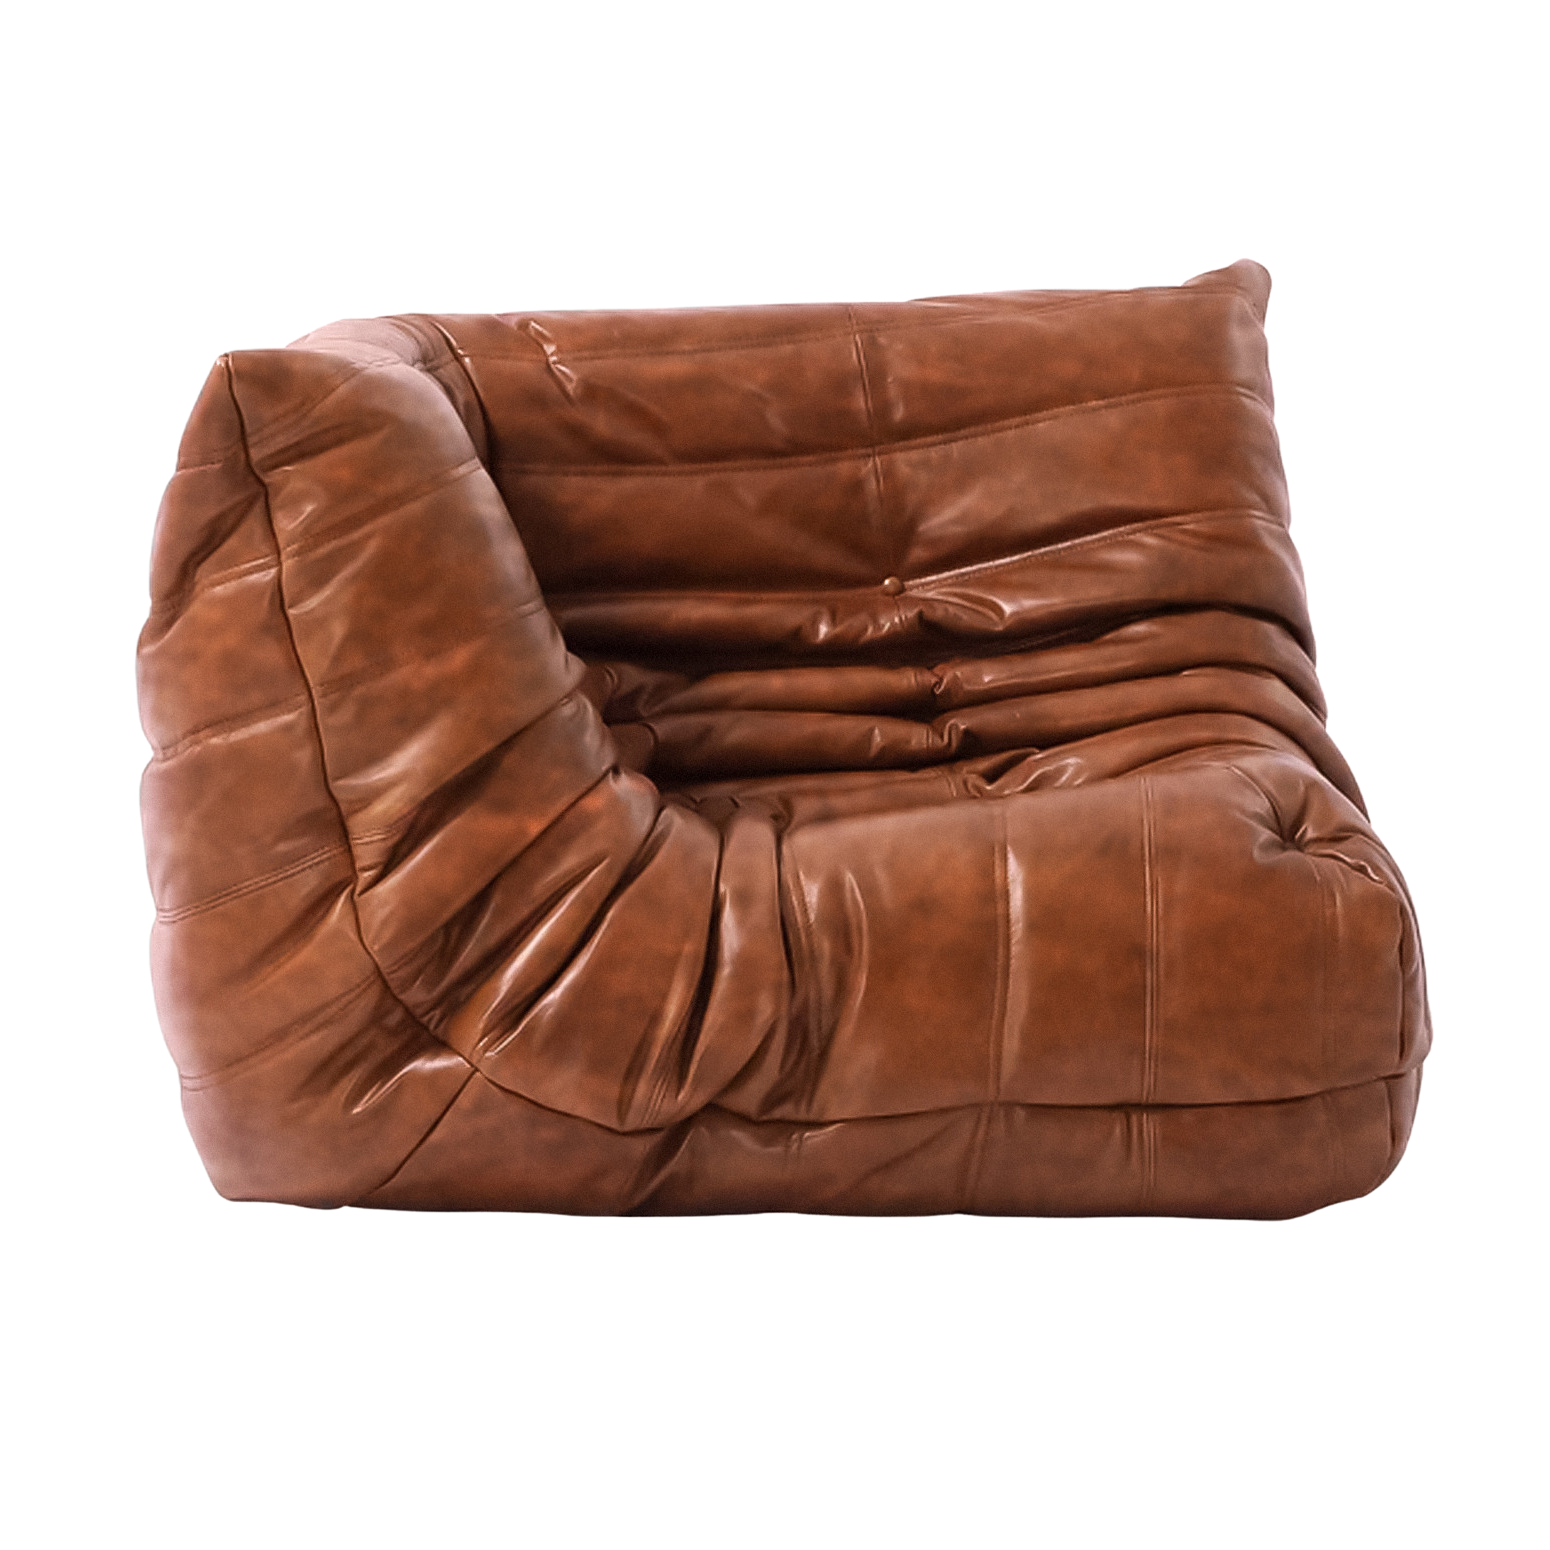 Camel Brown Leather Togo Corner Chair, 2- and 3-Seat Sofa by